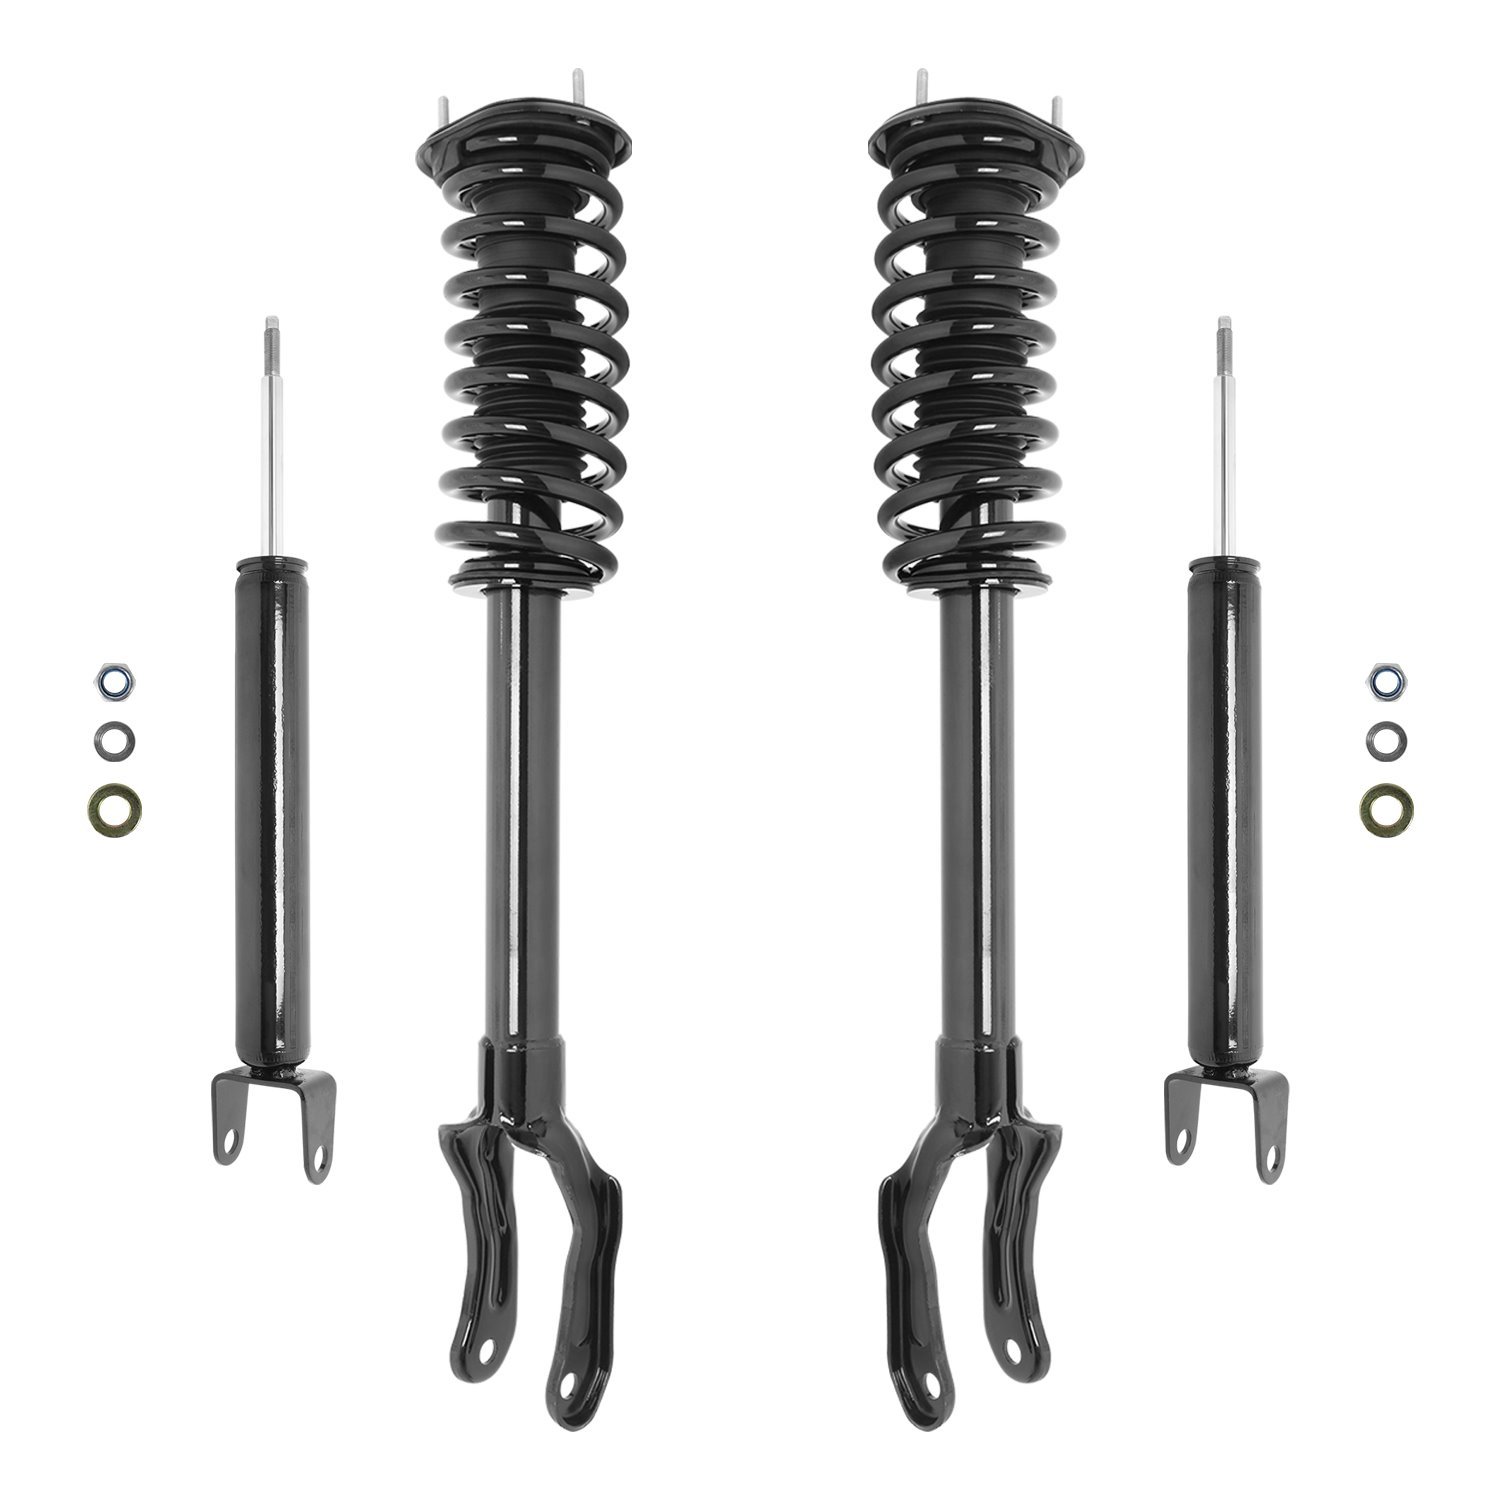 4-11213-256500-001 Front & Rear Suspension Strut & Coil Spring Assembly Fits Select Jeep Grand Cherokee